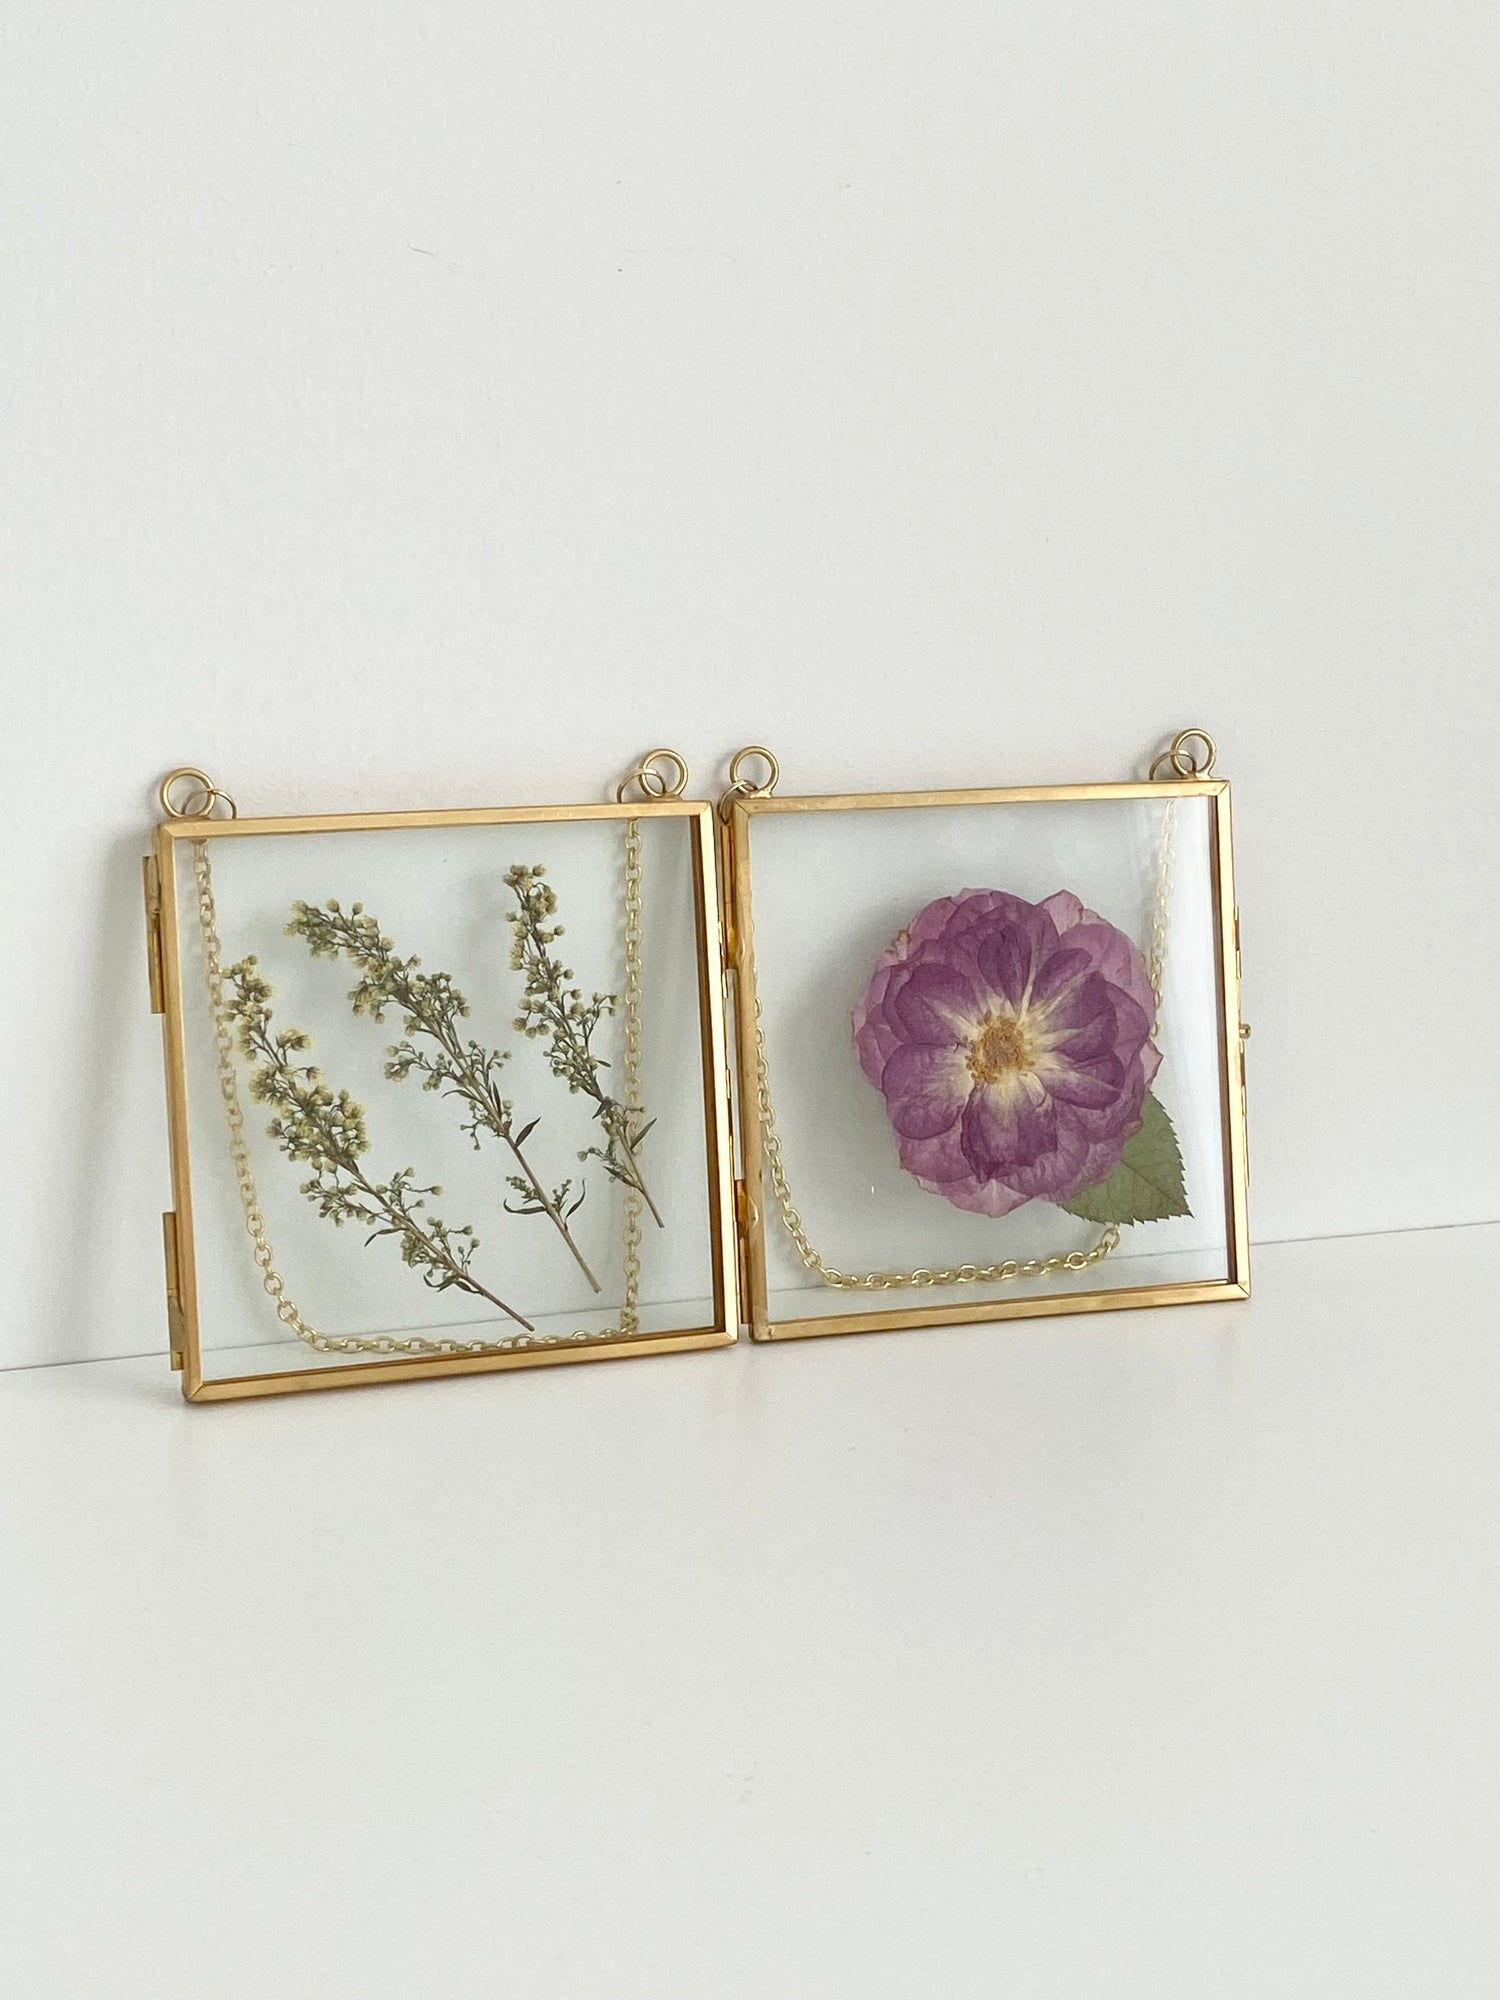 Beedecor Double Glass Frame for Pressed Flowers, Leaf and Artwork - Set of  2 Hanging Picture Frames, Tempered Glass Floating Pressed Flower Frames